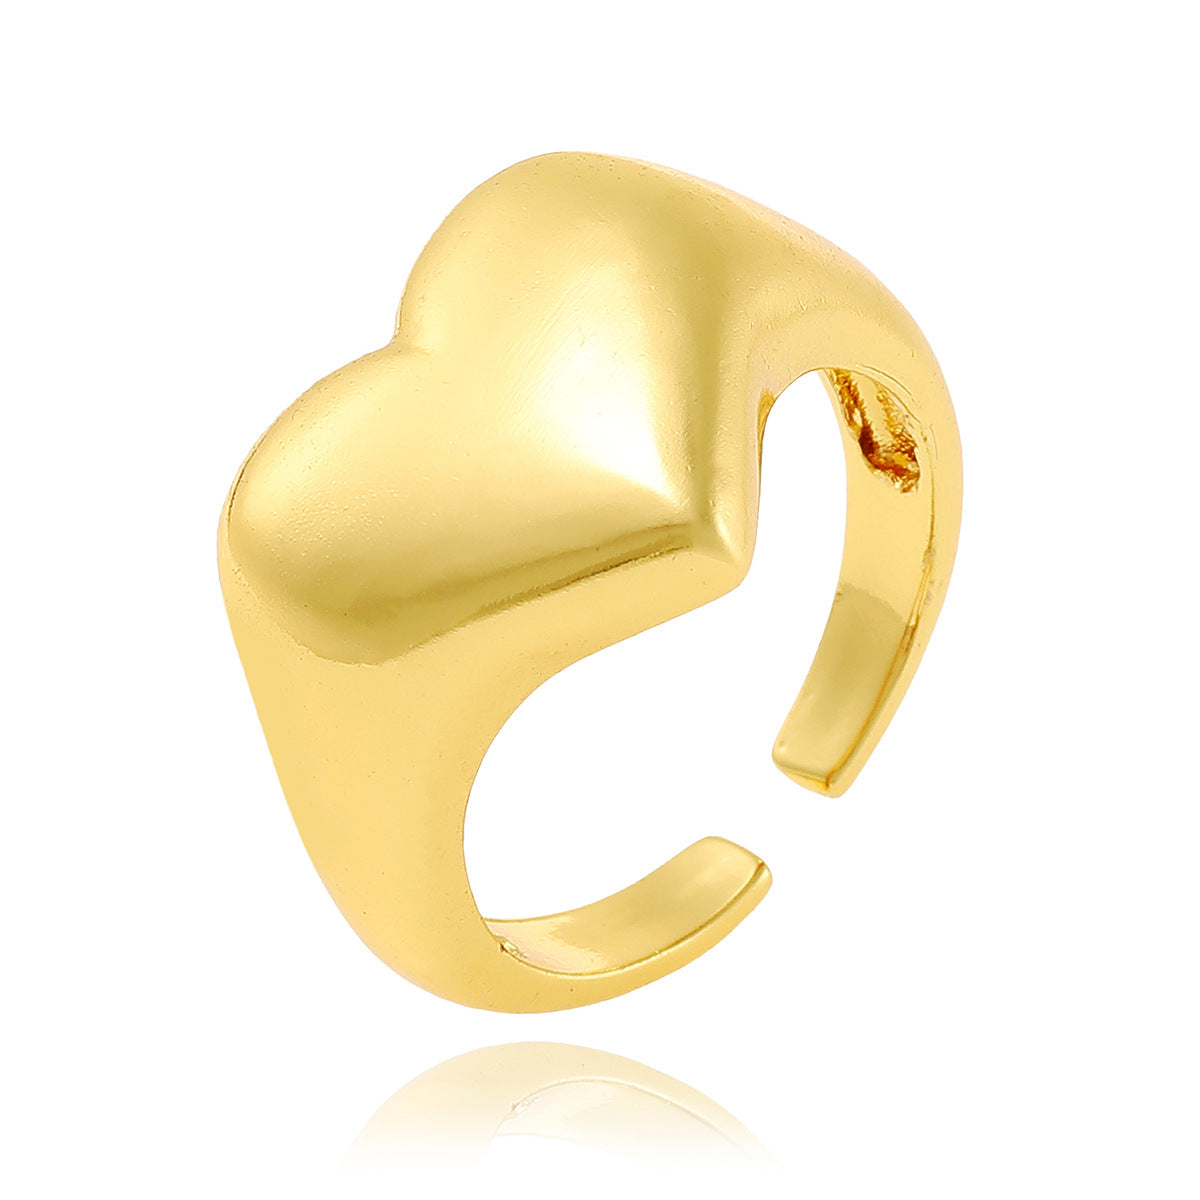 Commuter Ring Women's Copper Plating 18K Gold-plated Ring Adjustable